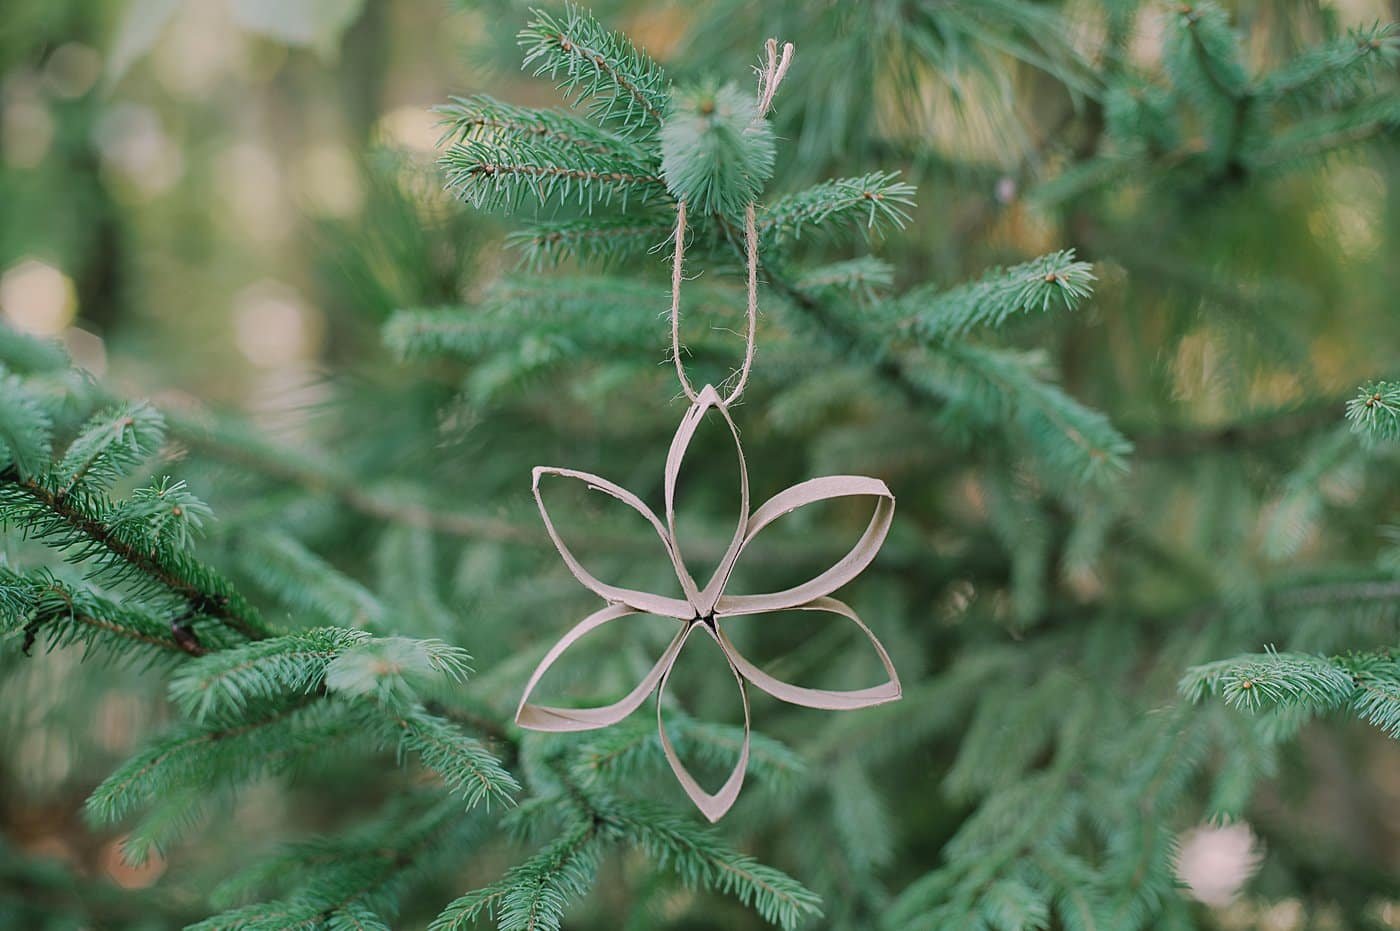 How to make DIY toilet paper roll flower ornaments.